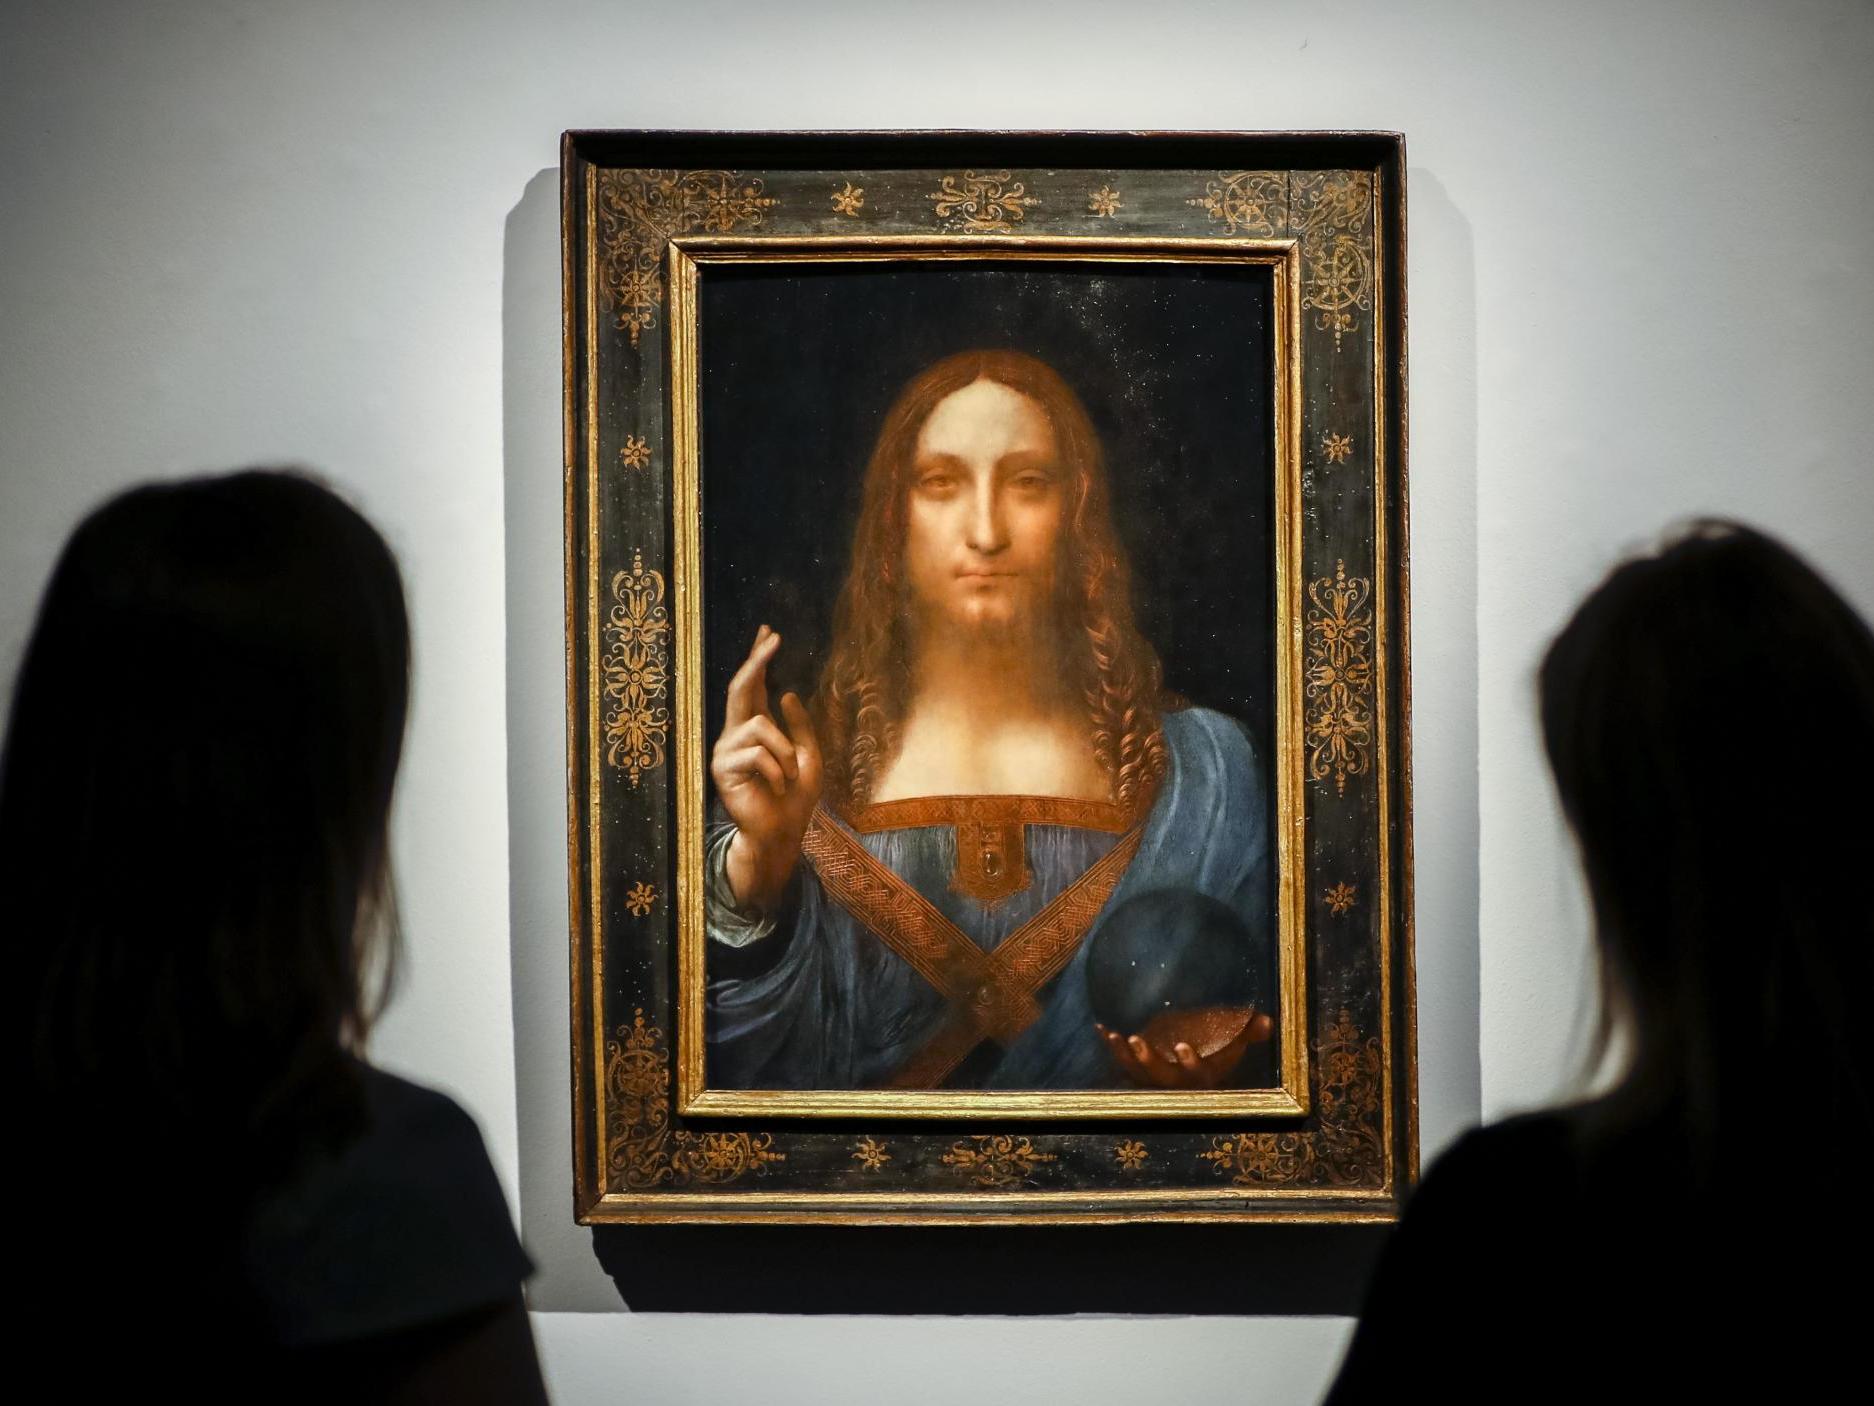 ‘Salvator Mundi’ is the most expensive painting ever sold at public auction